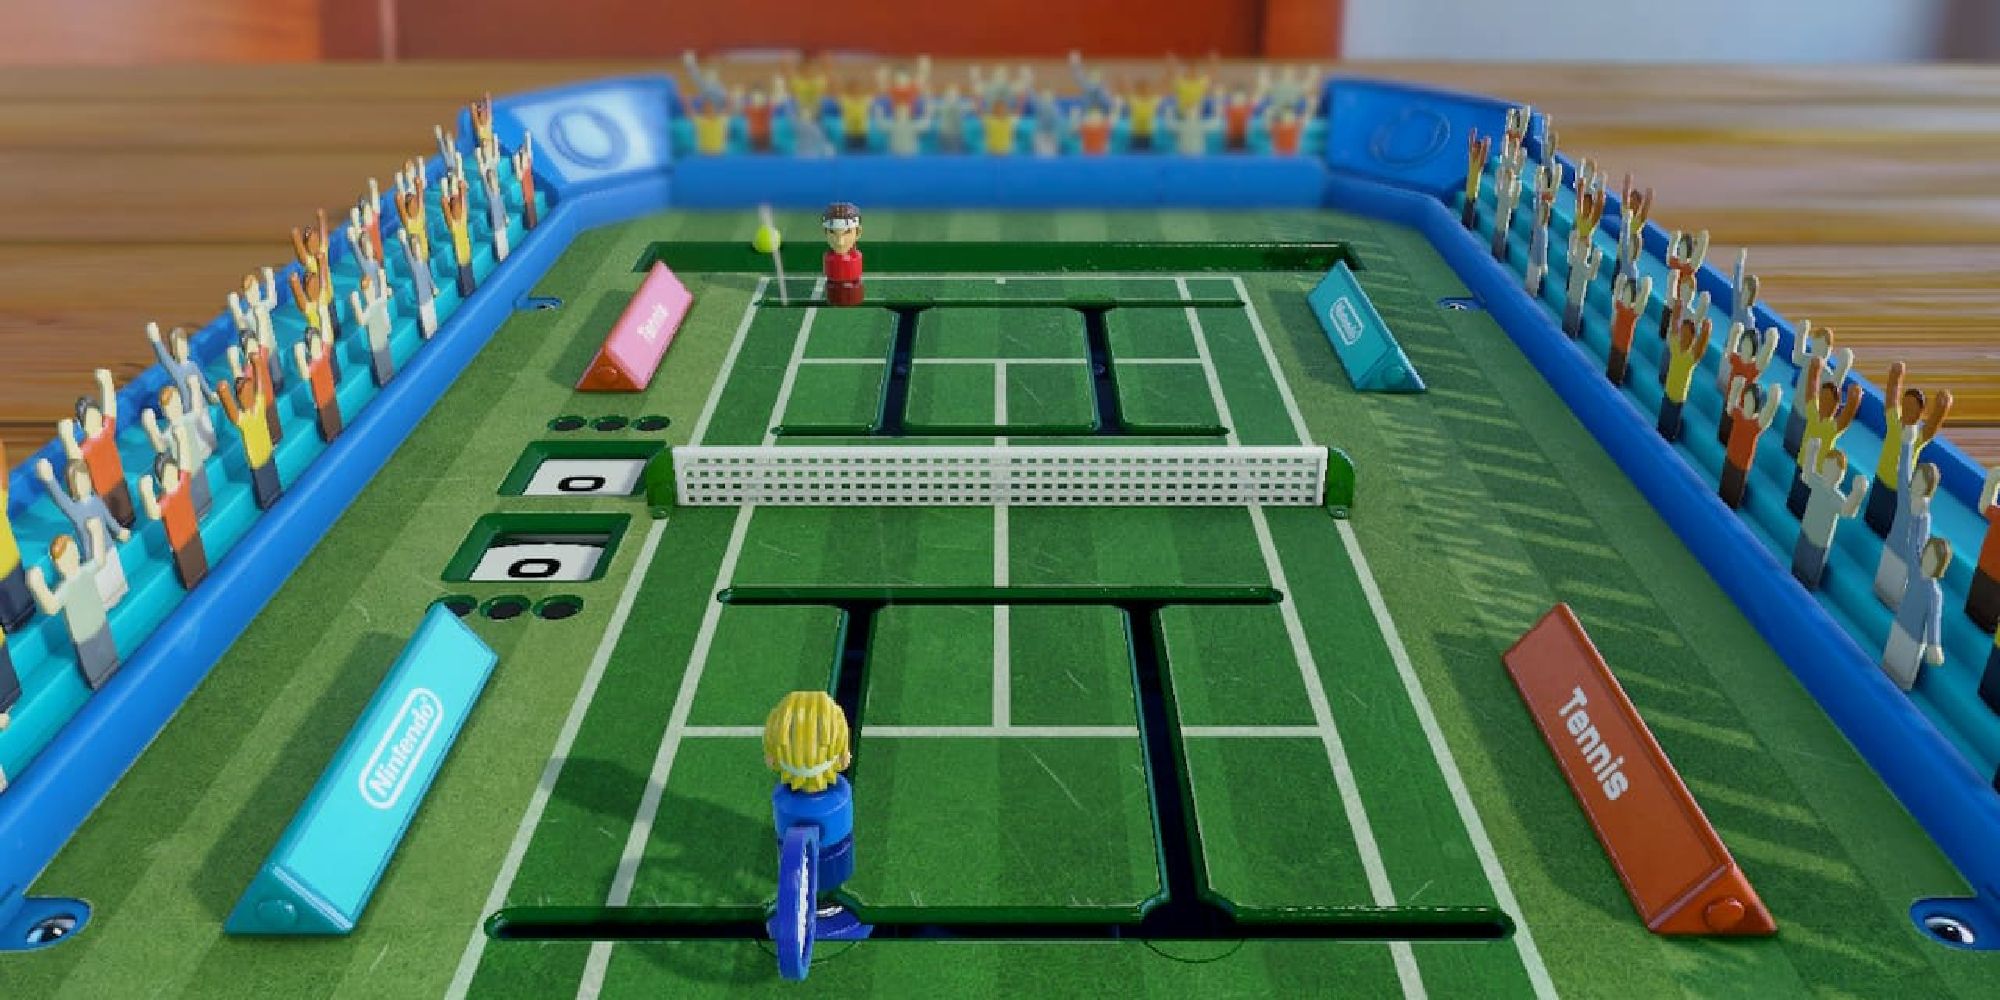 Clubhouse Games a toy set mimicking Tennis with a blue and red player on either side of the net 